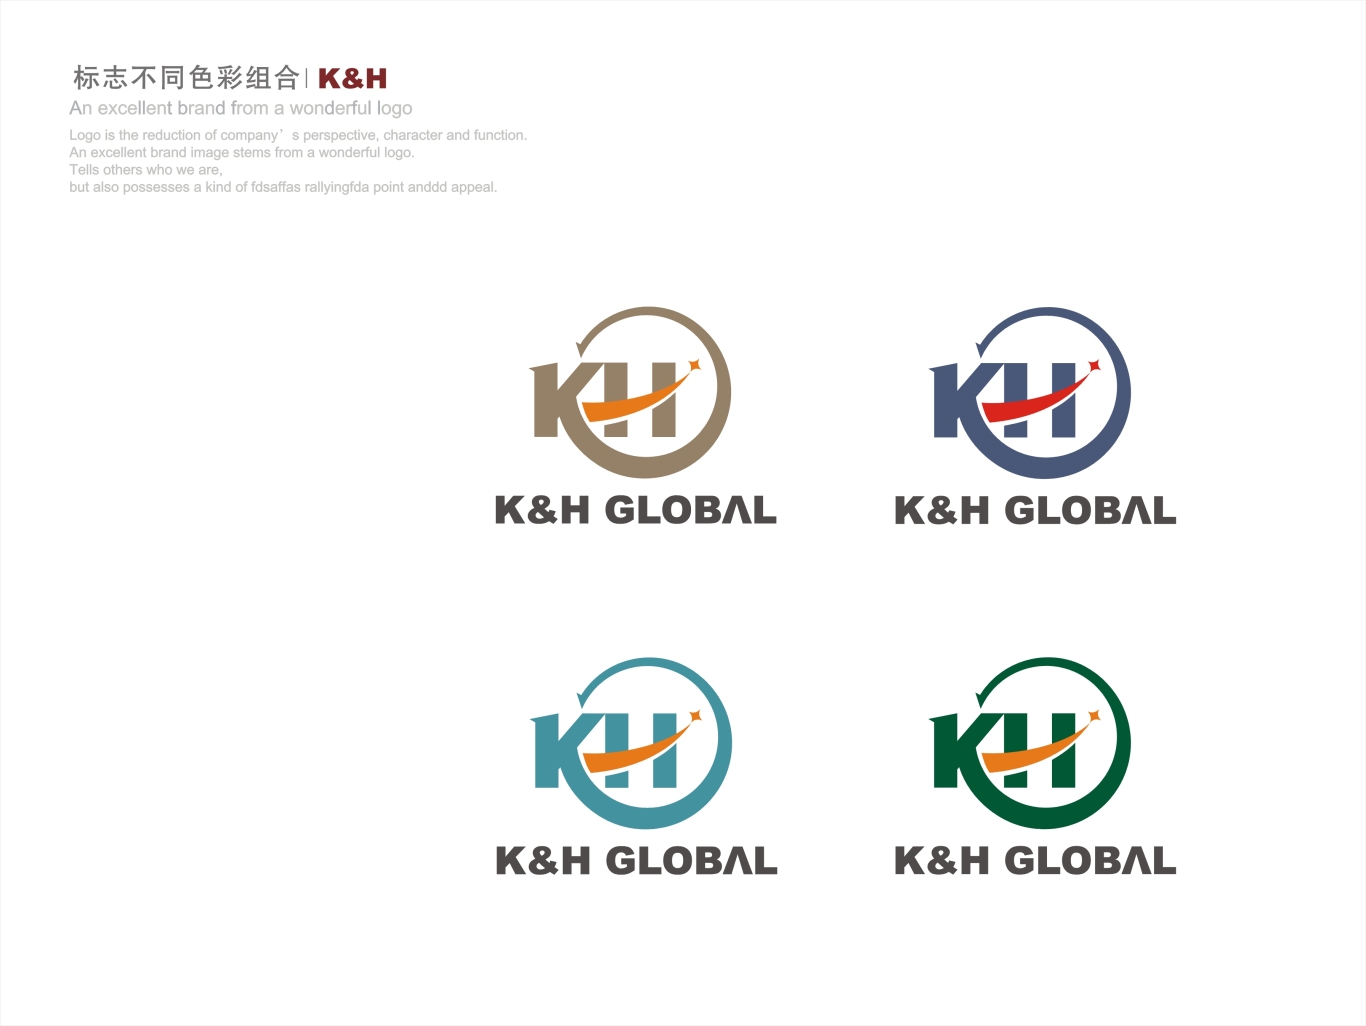 K&H GLOBAL 标志设计图3